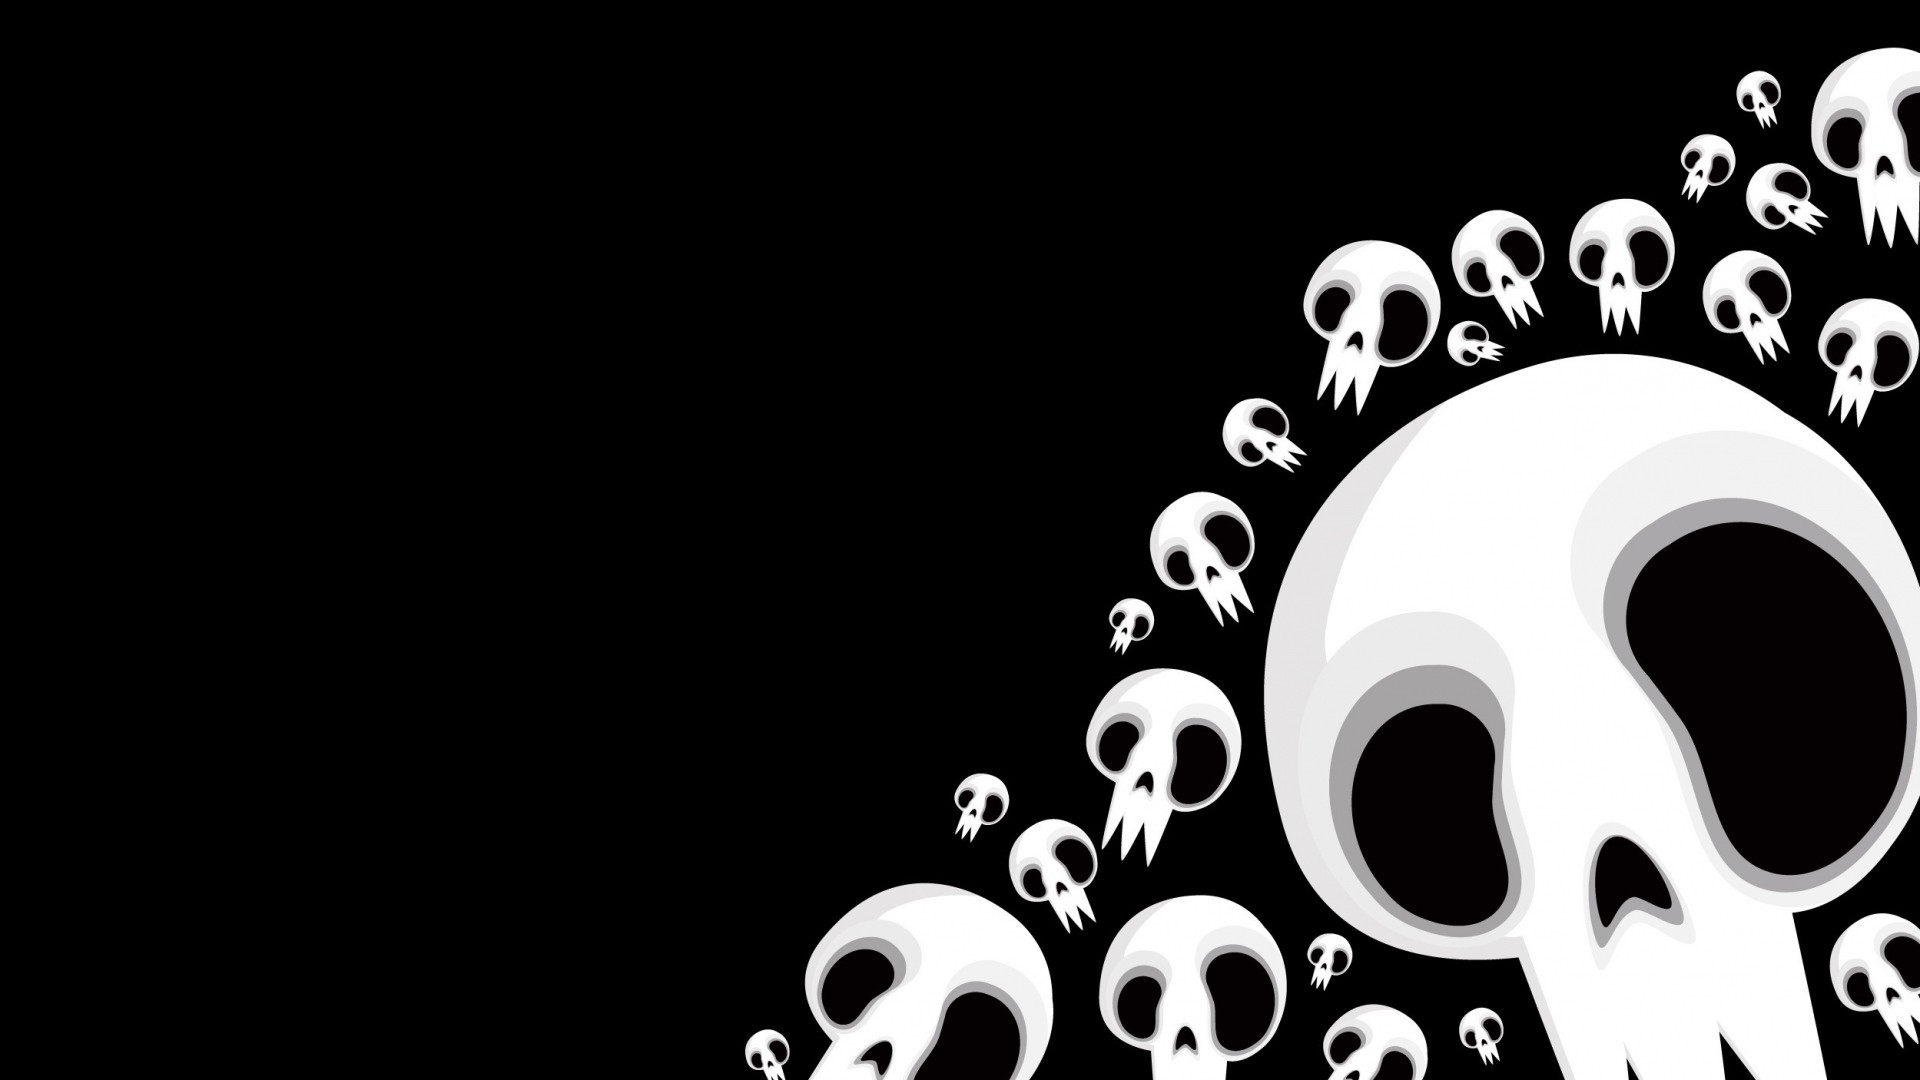 1920x1080 Get the latest skull, black, white news, pictures and videos and learn all  about skull, black, white from wallpapers4u.org, your wallpaper news source.